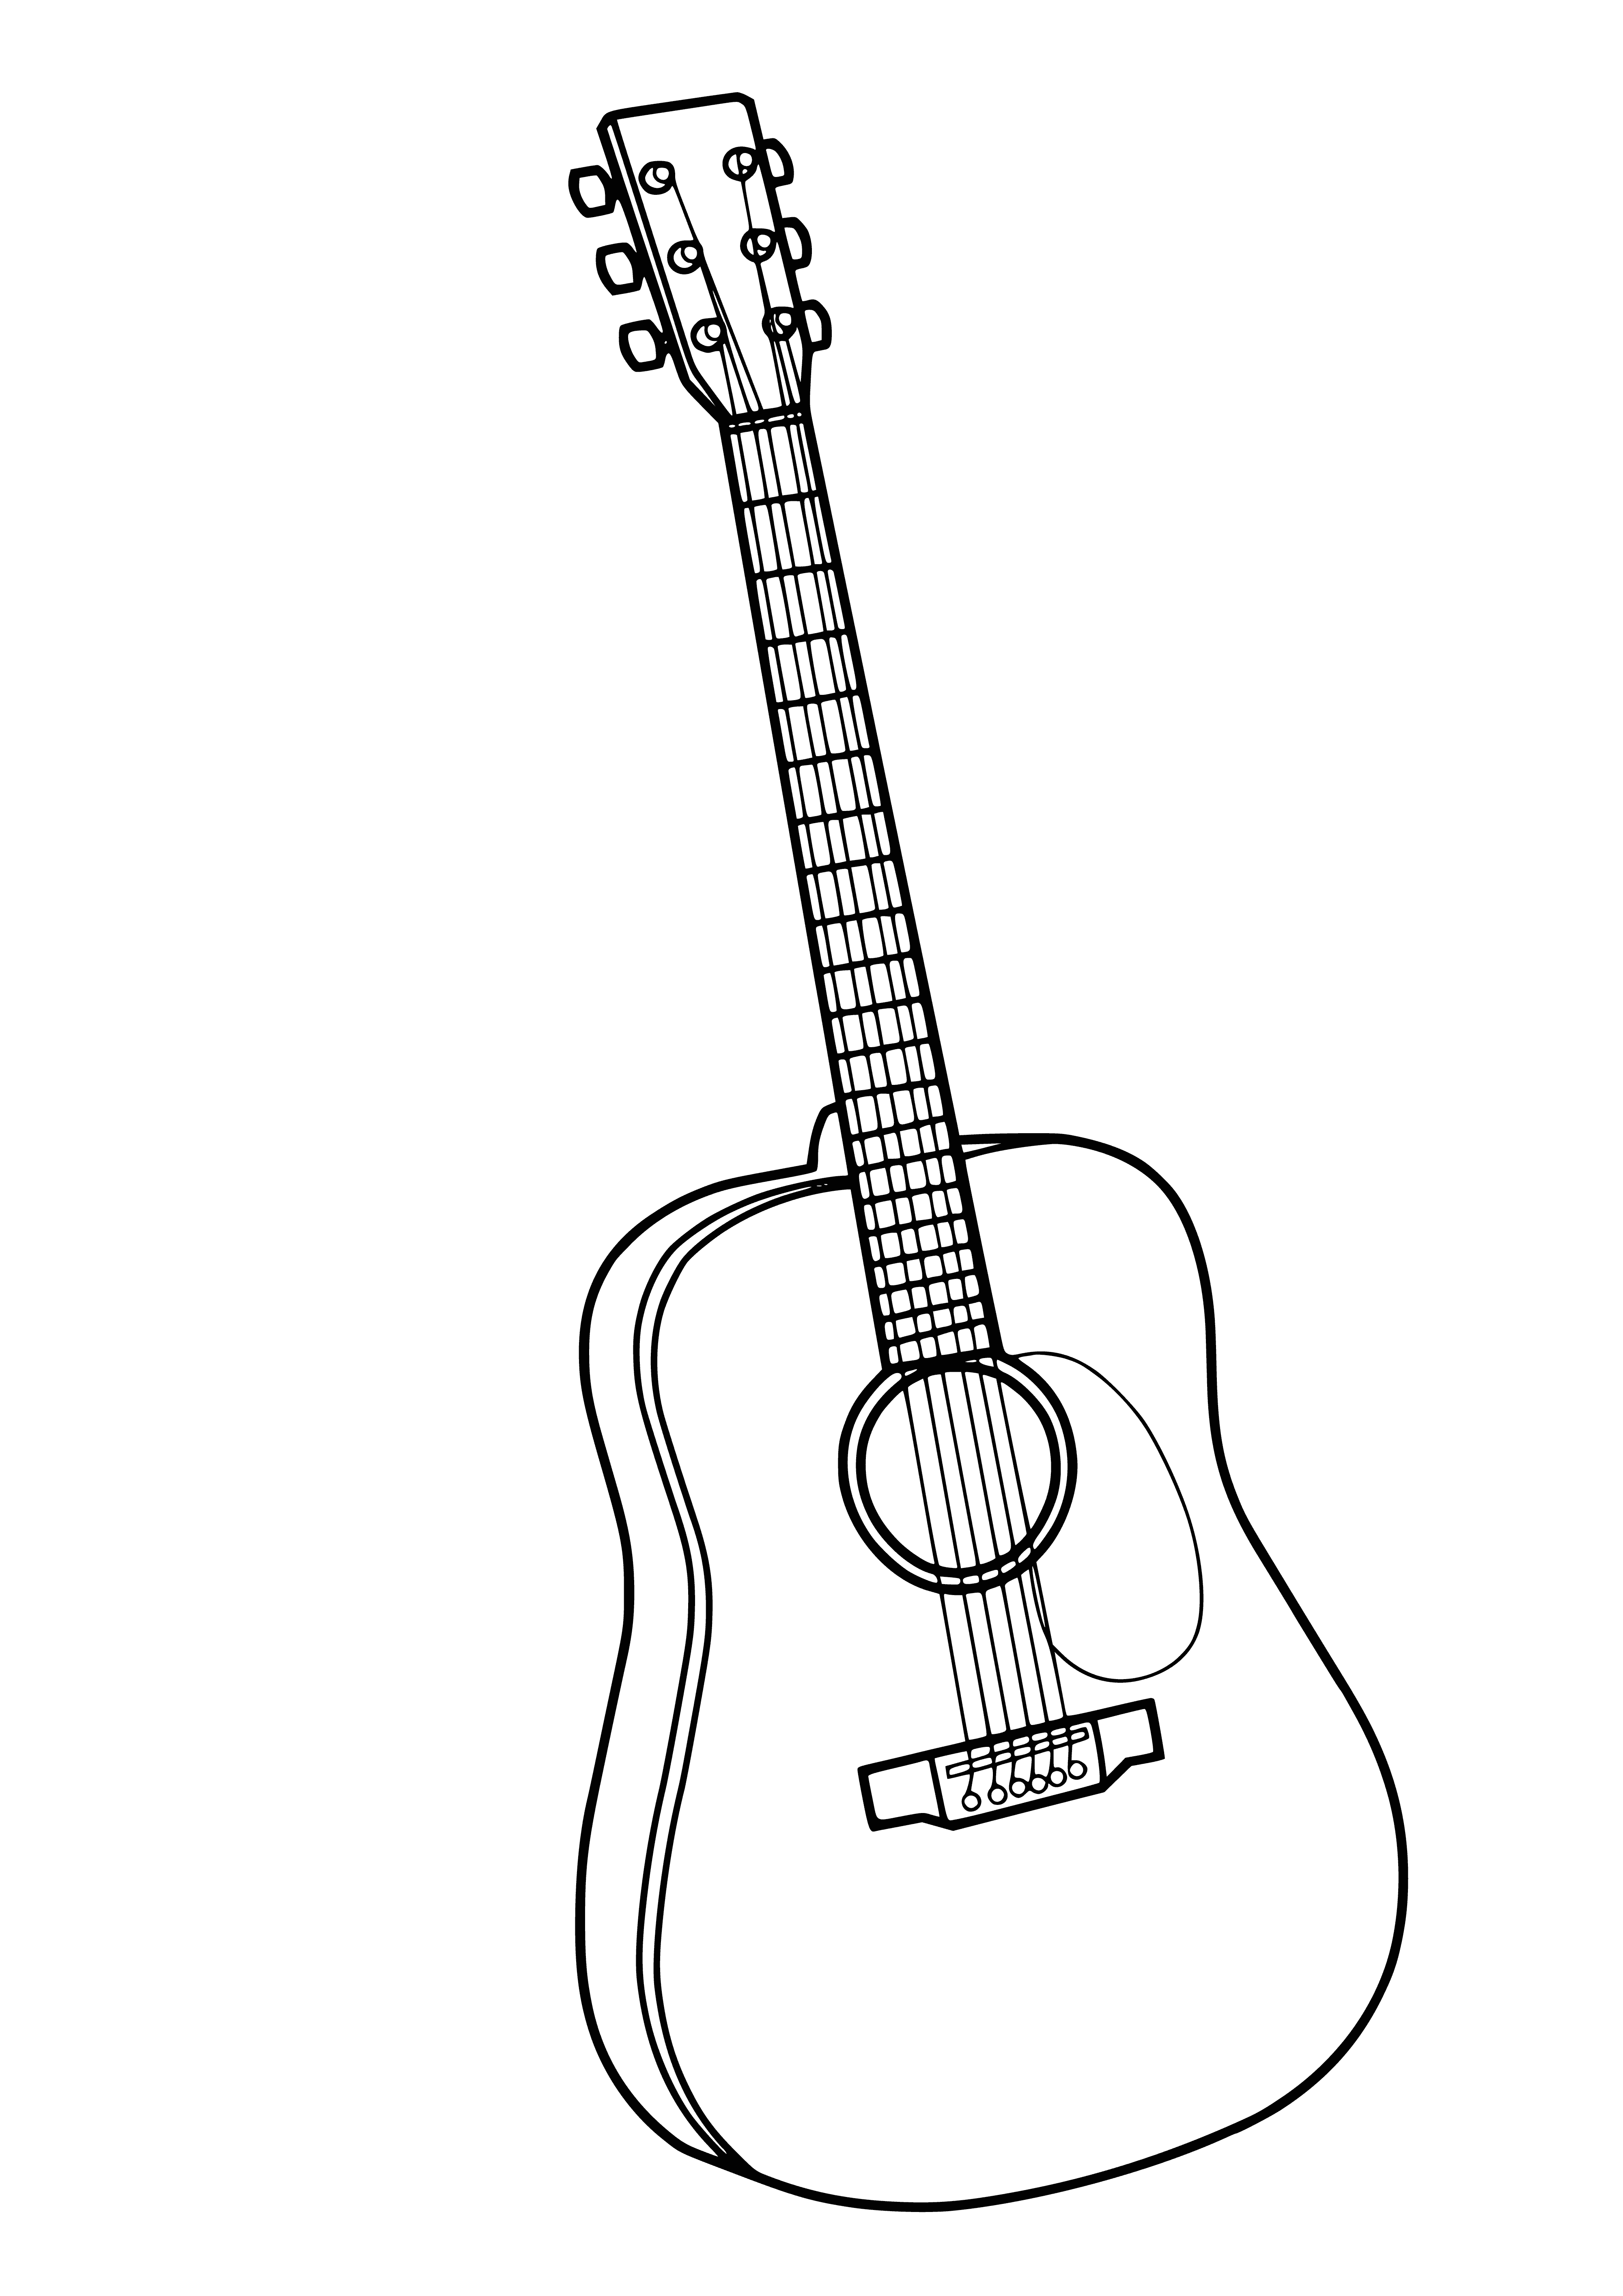 coloring page: Man playing guitar on a stool, with large beard, brown hat, blue shirt, and guitar pick in right hand. #musician